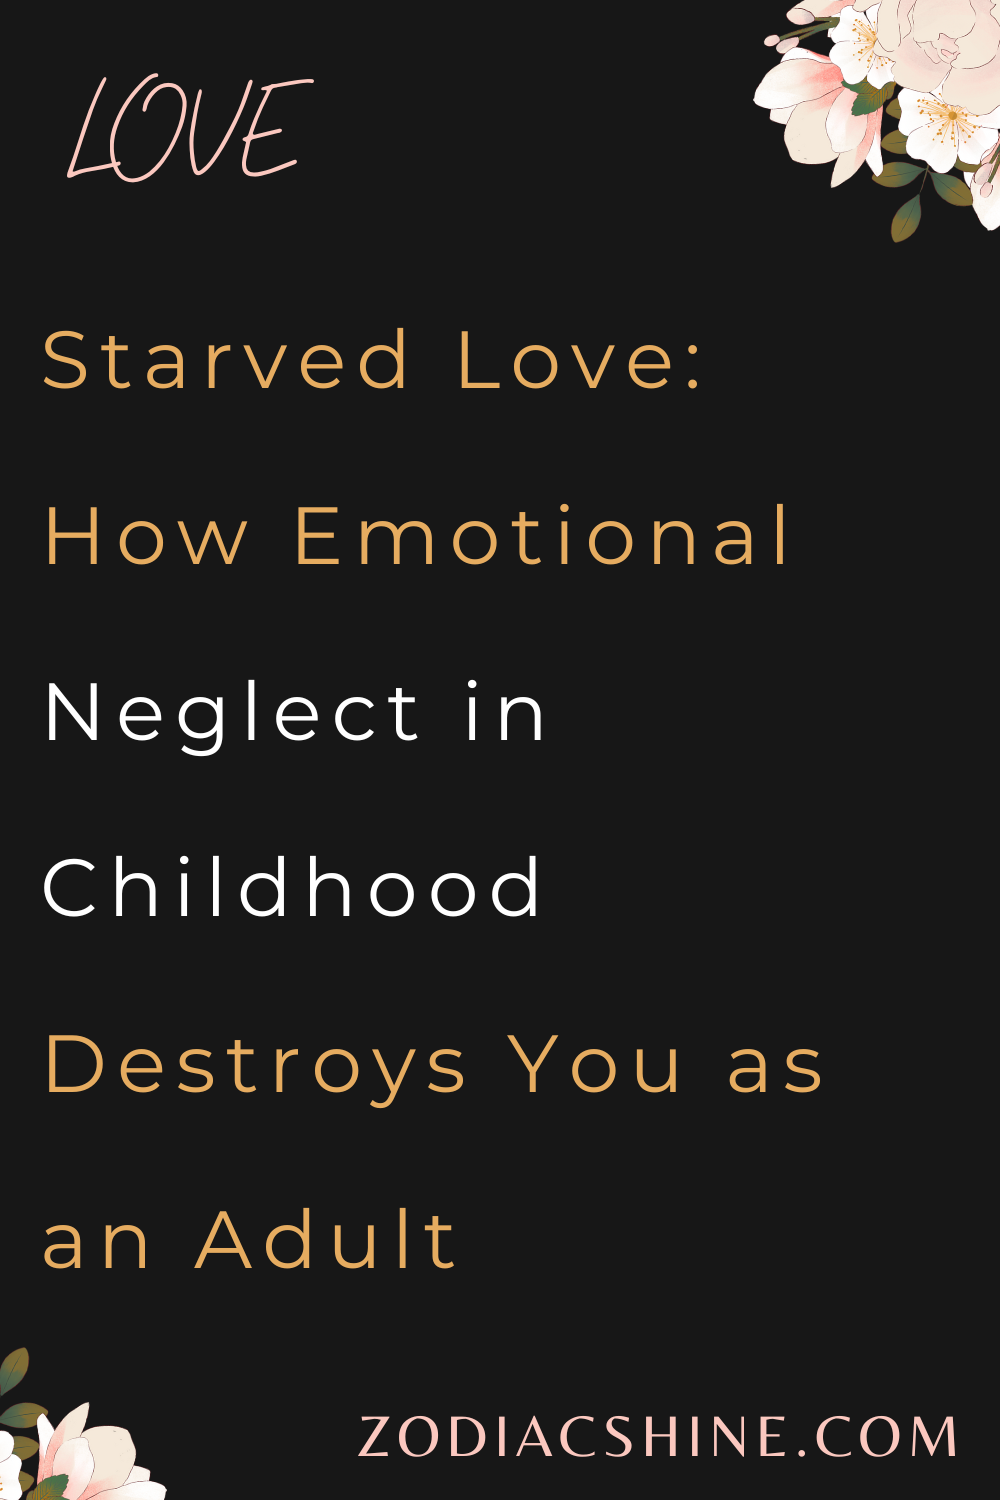 Starved Love: How Emotional Neglect in Childhood Destroys You as an Adult